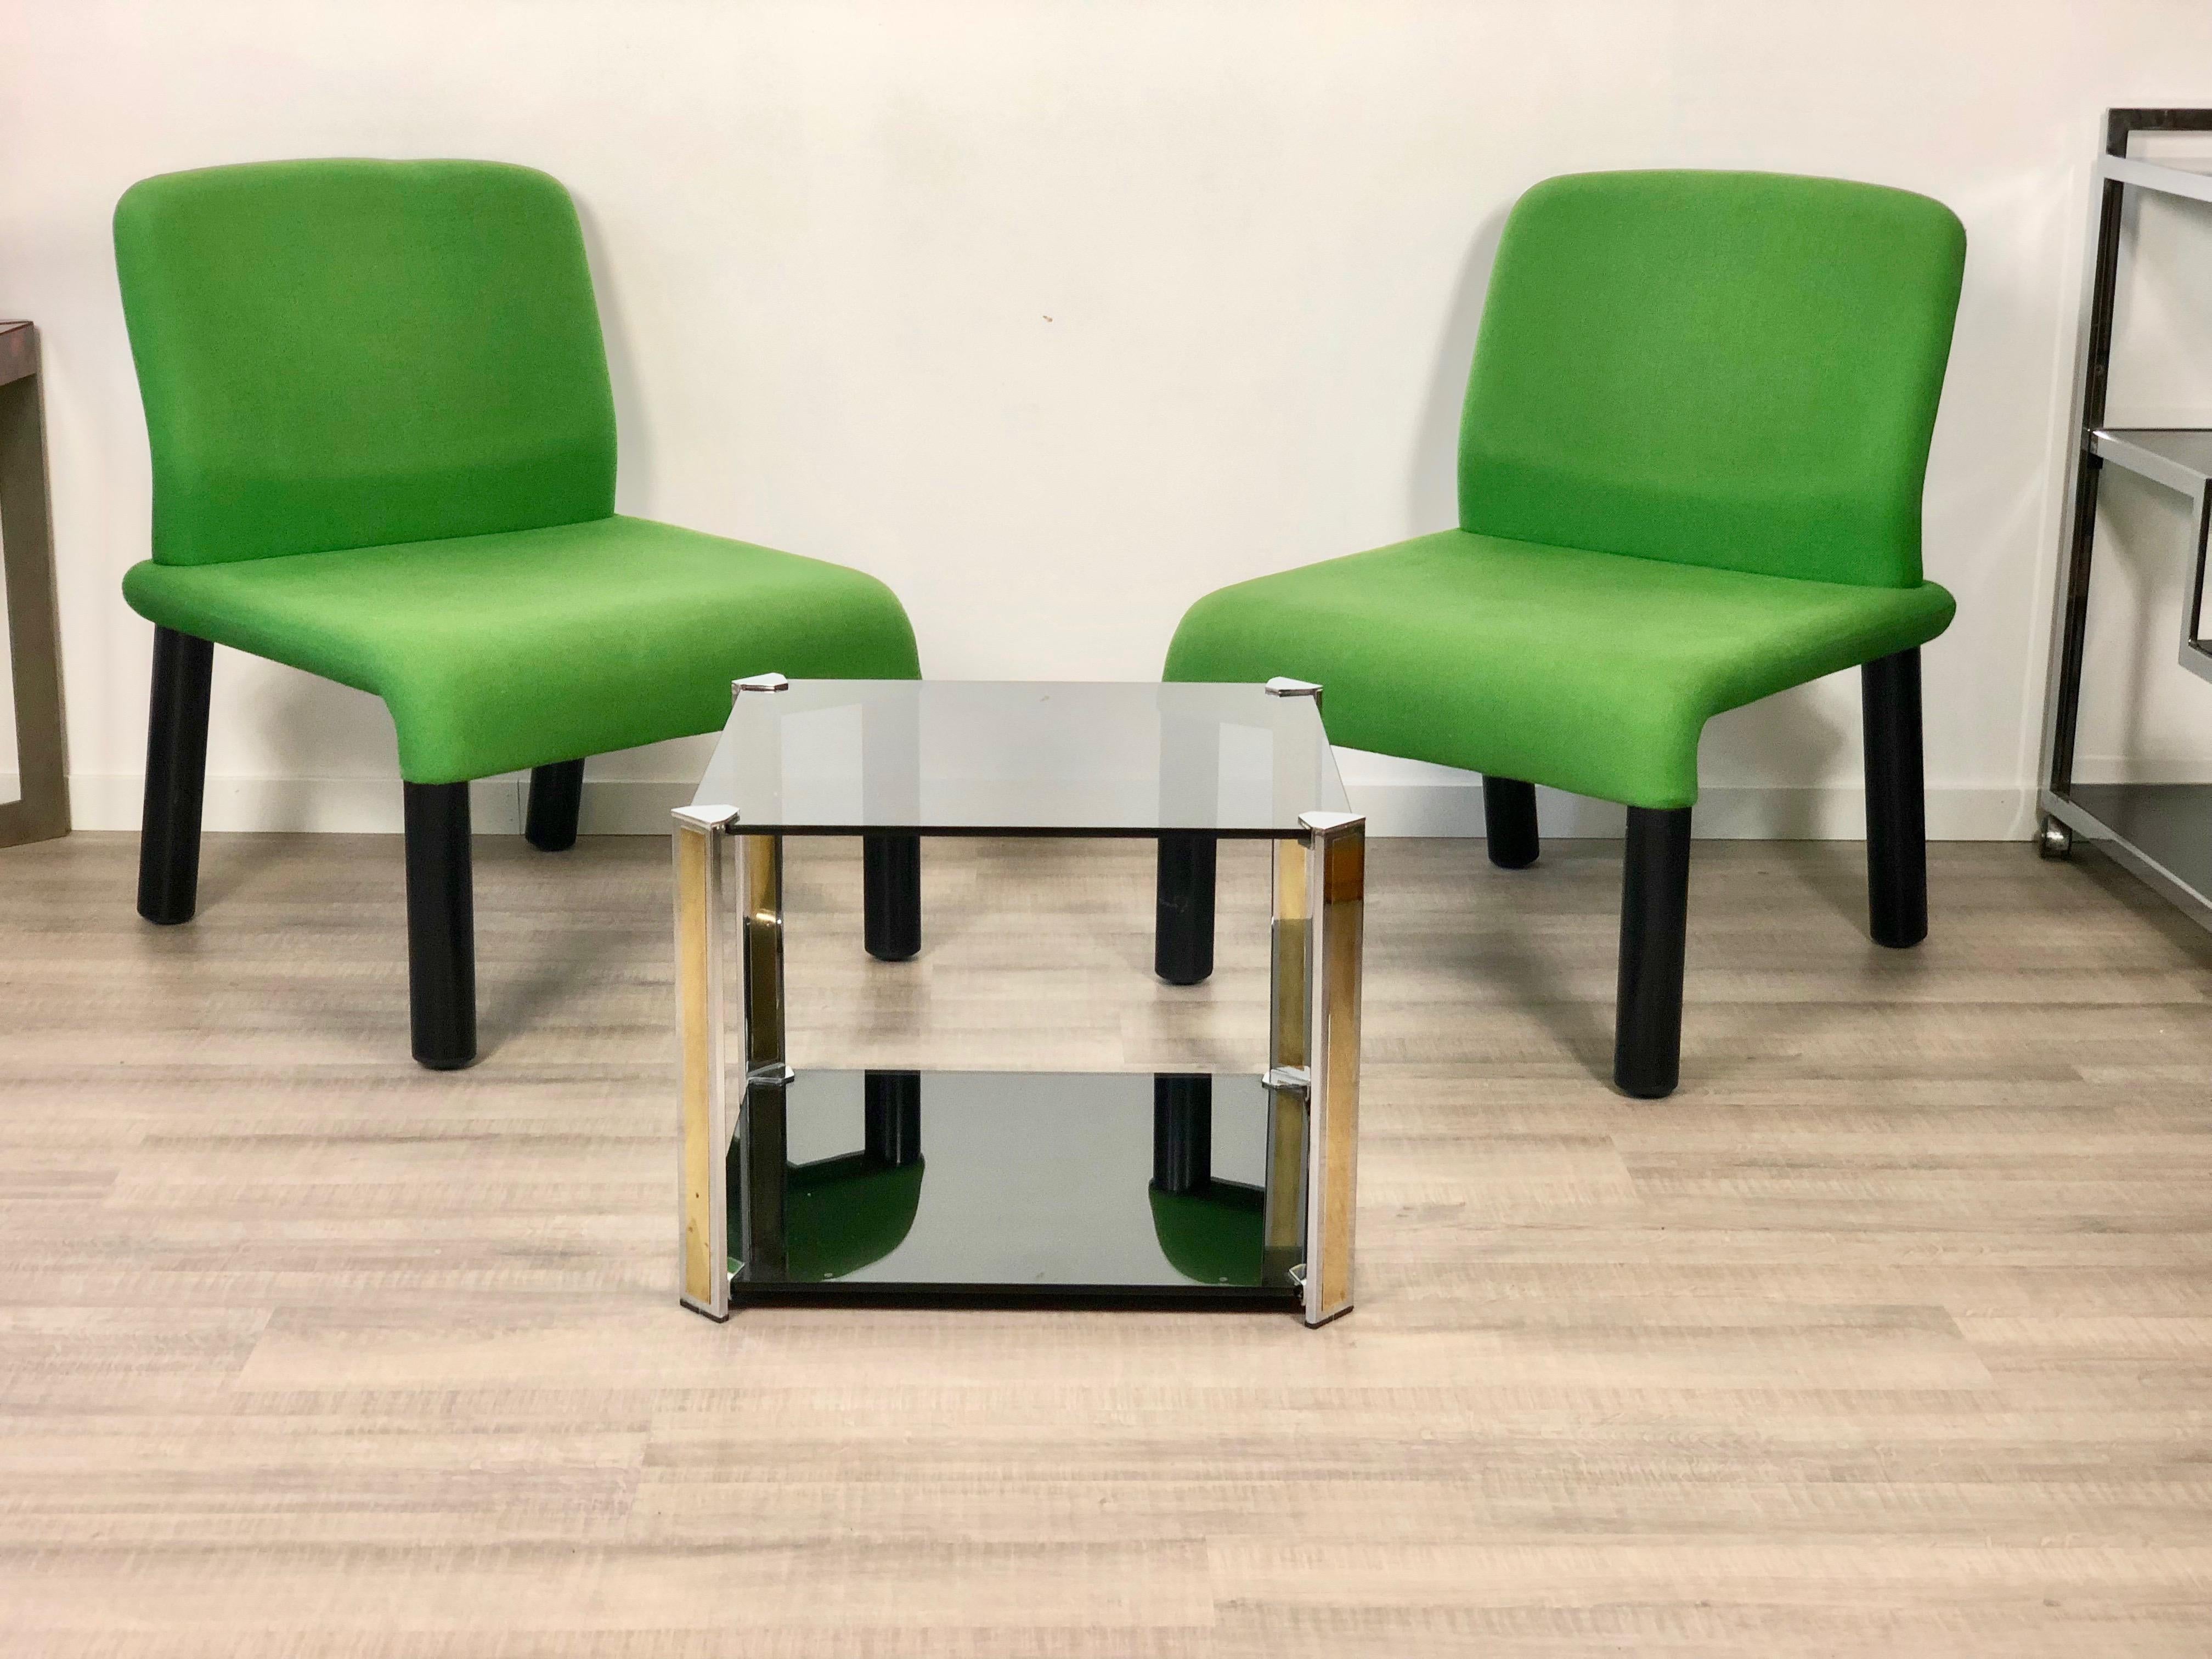 Pair of Green Armchair in Plastic Fabric, Italy, 1970s For Sale 2